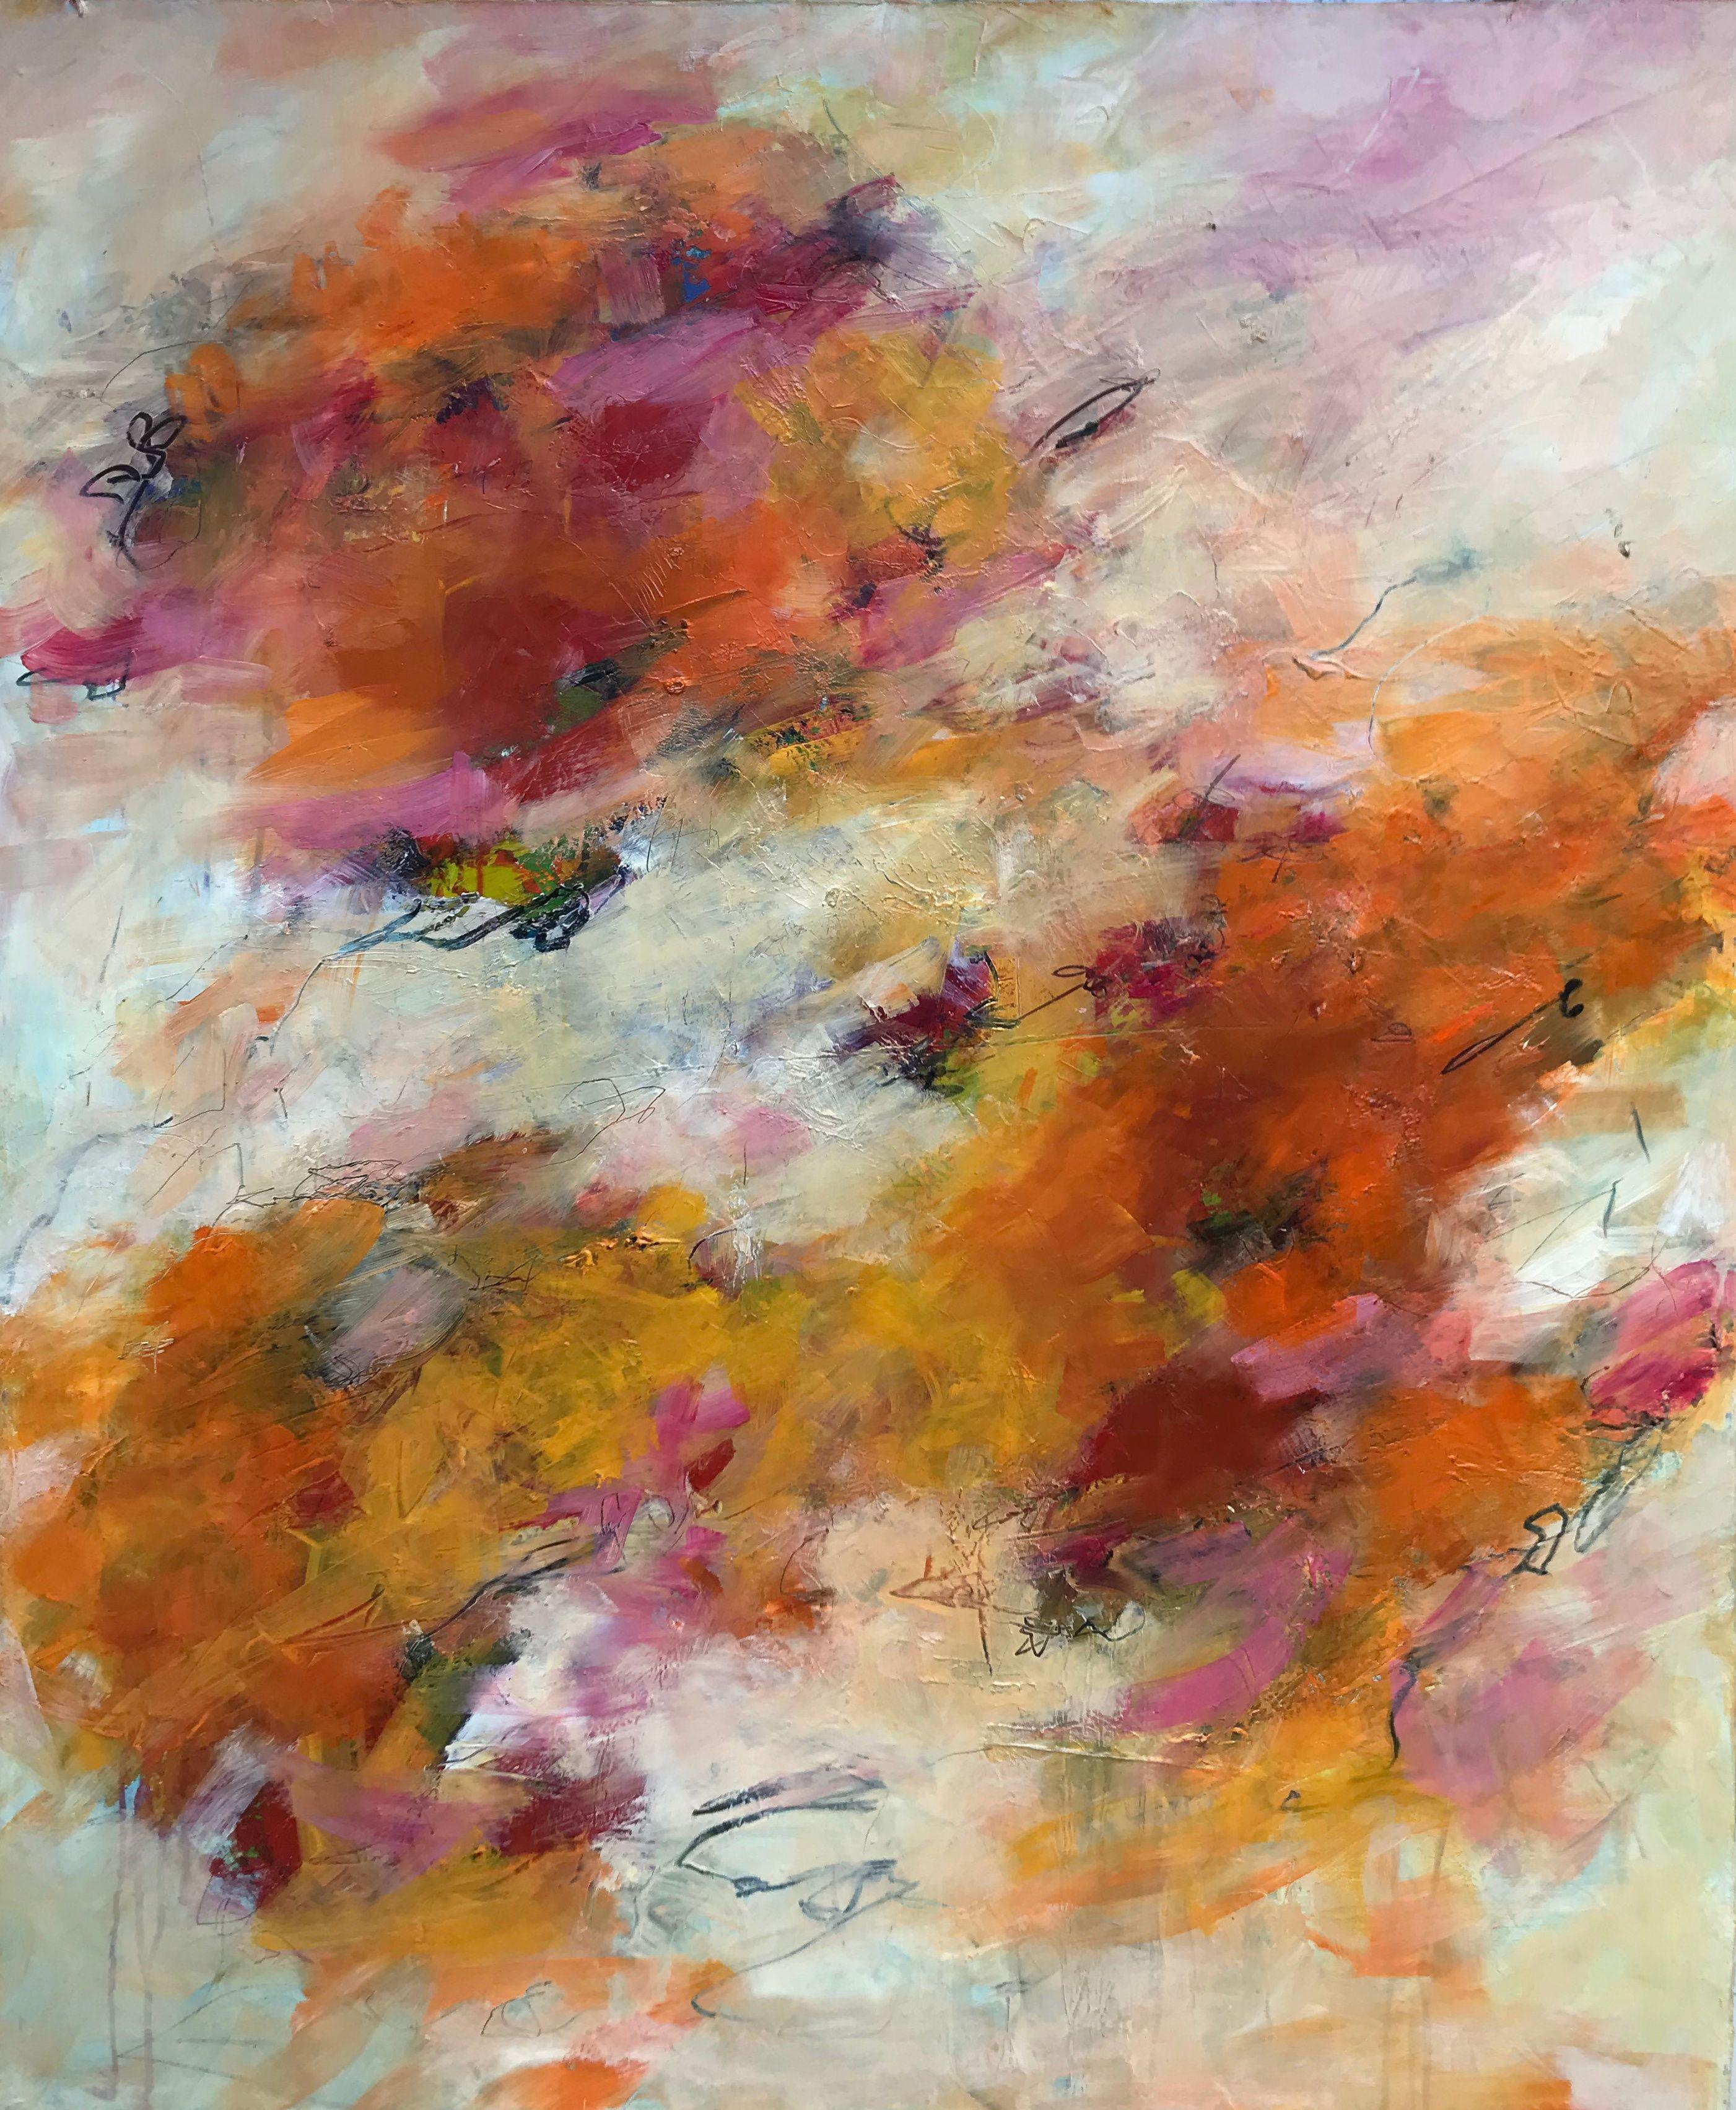 Angela Dierks Abstract Painting - Unconditional Love, Painting, Oil on Canvas